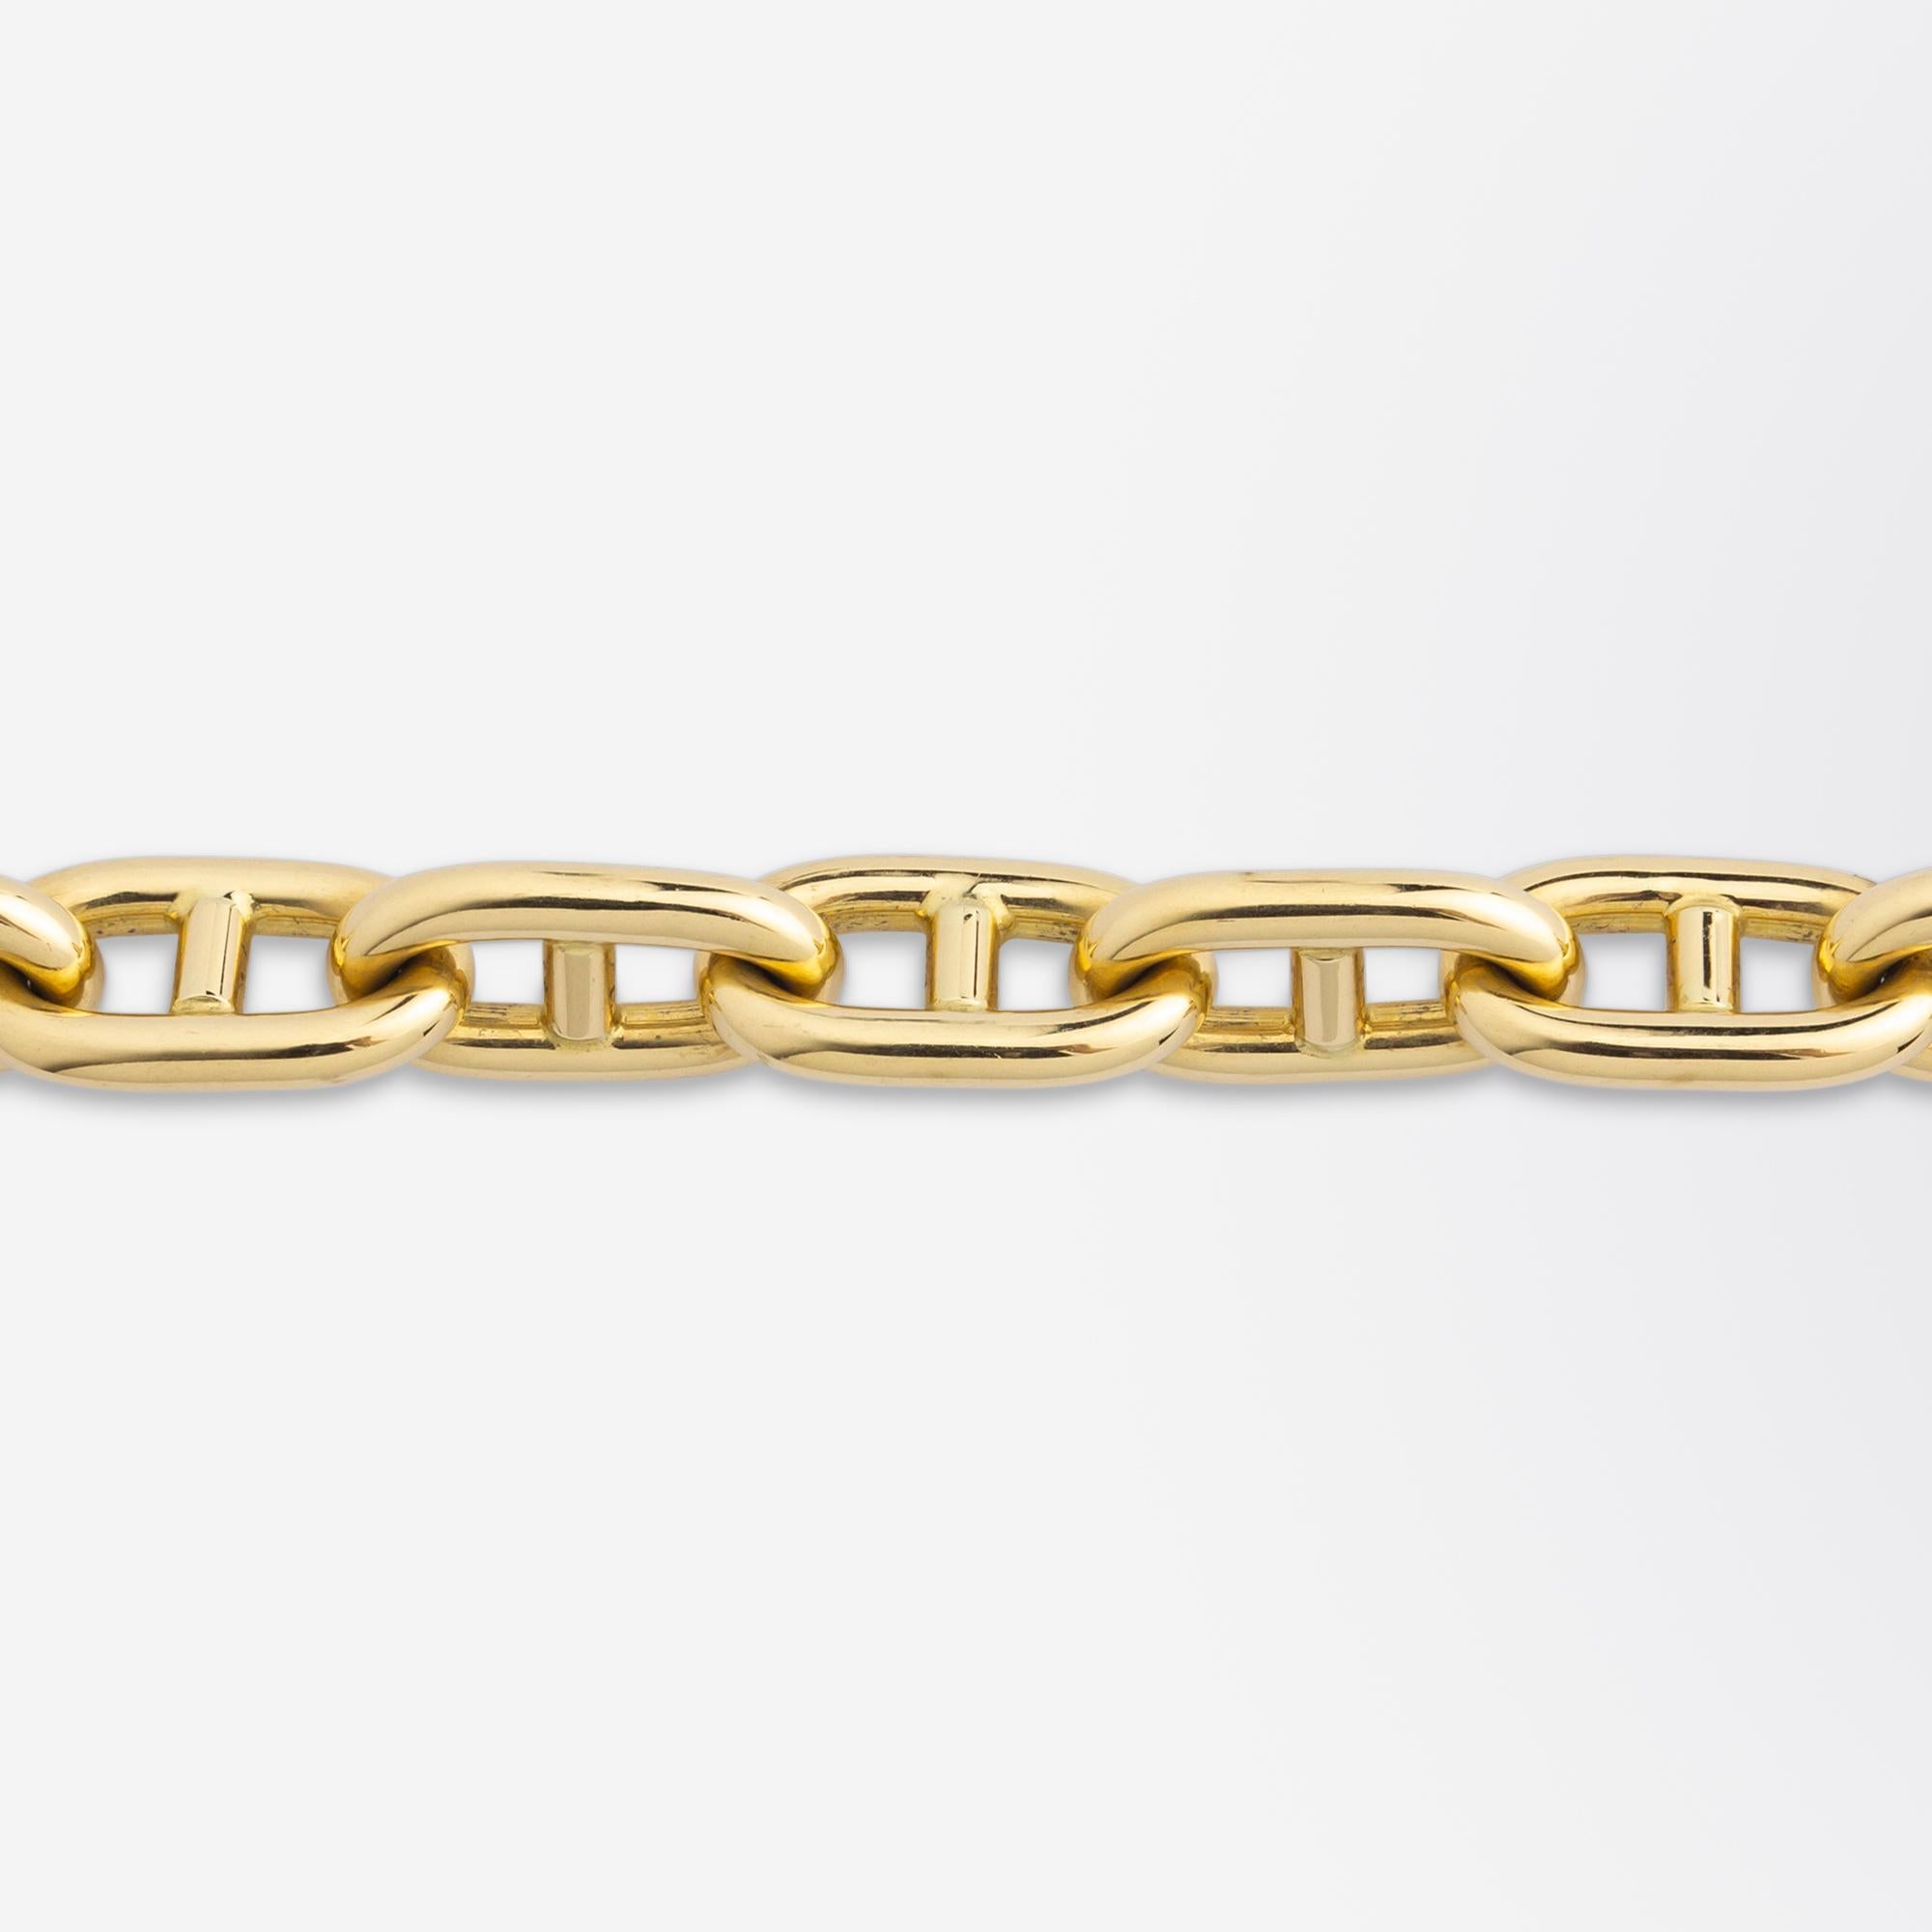 18 Karat Yellow Gold Anchor Link Bracelet With Toggle Clasp In Good Condition For Sale In Brisbane, QLD